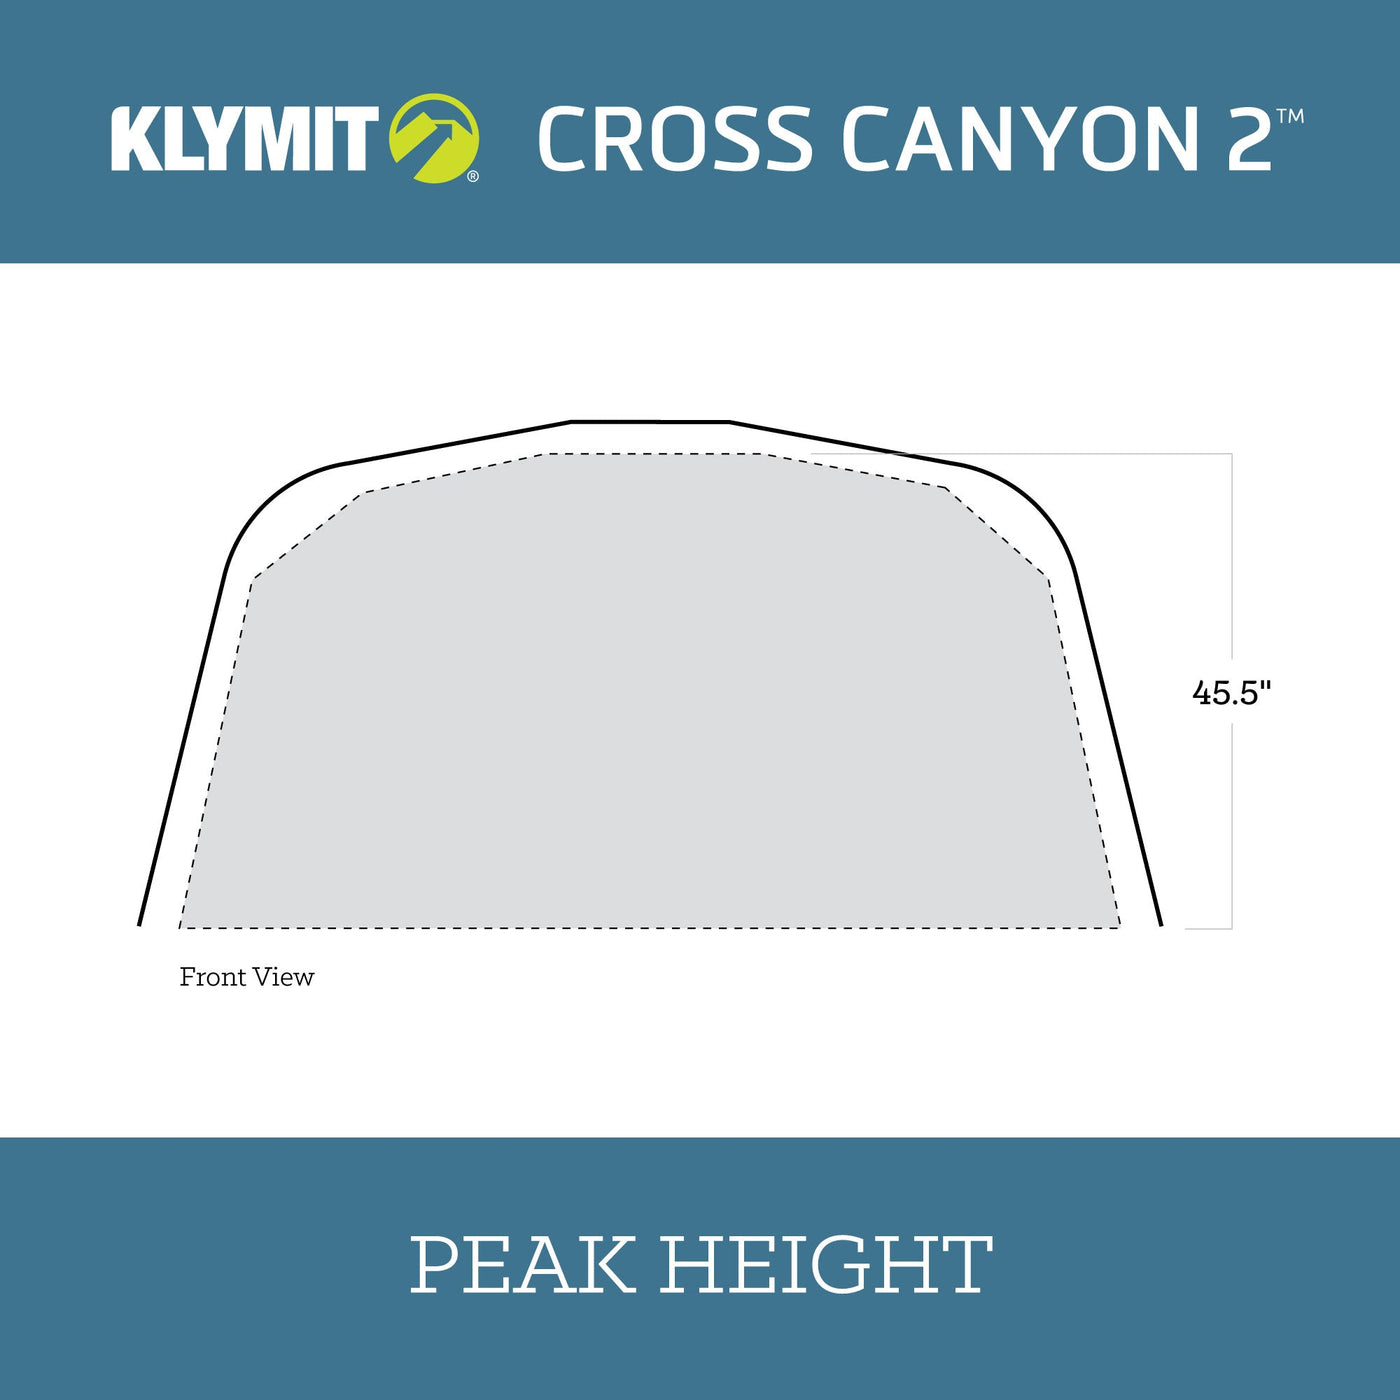 Cross Canyon Tents by Klymit